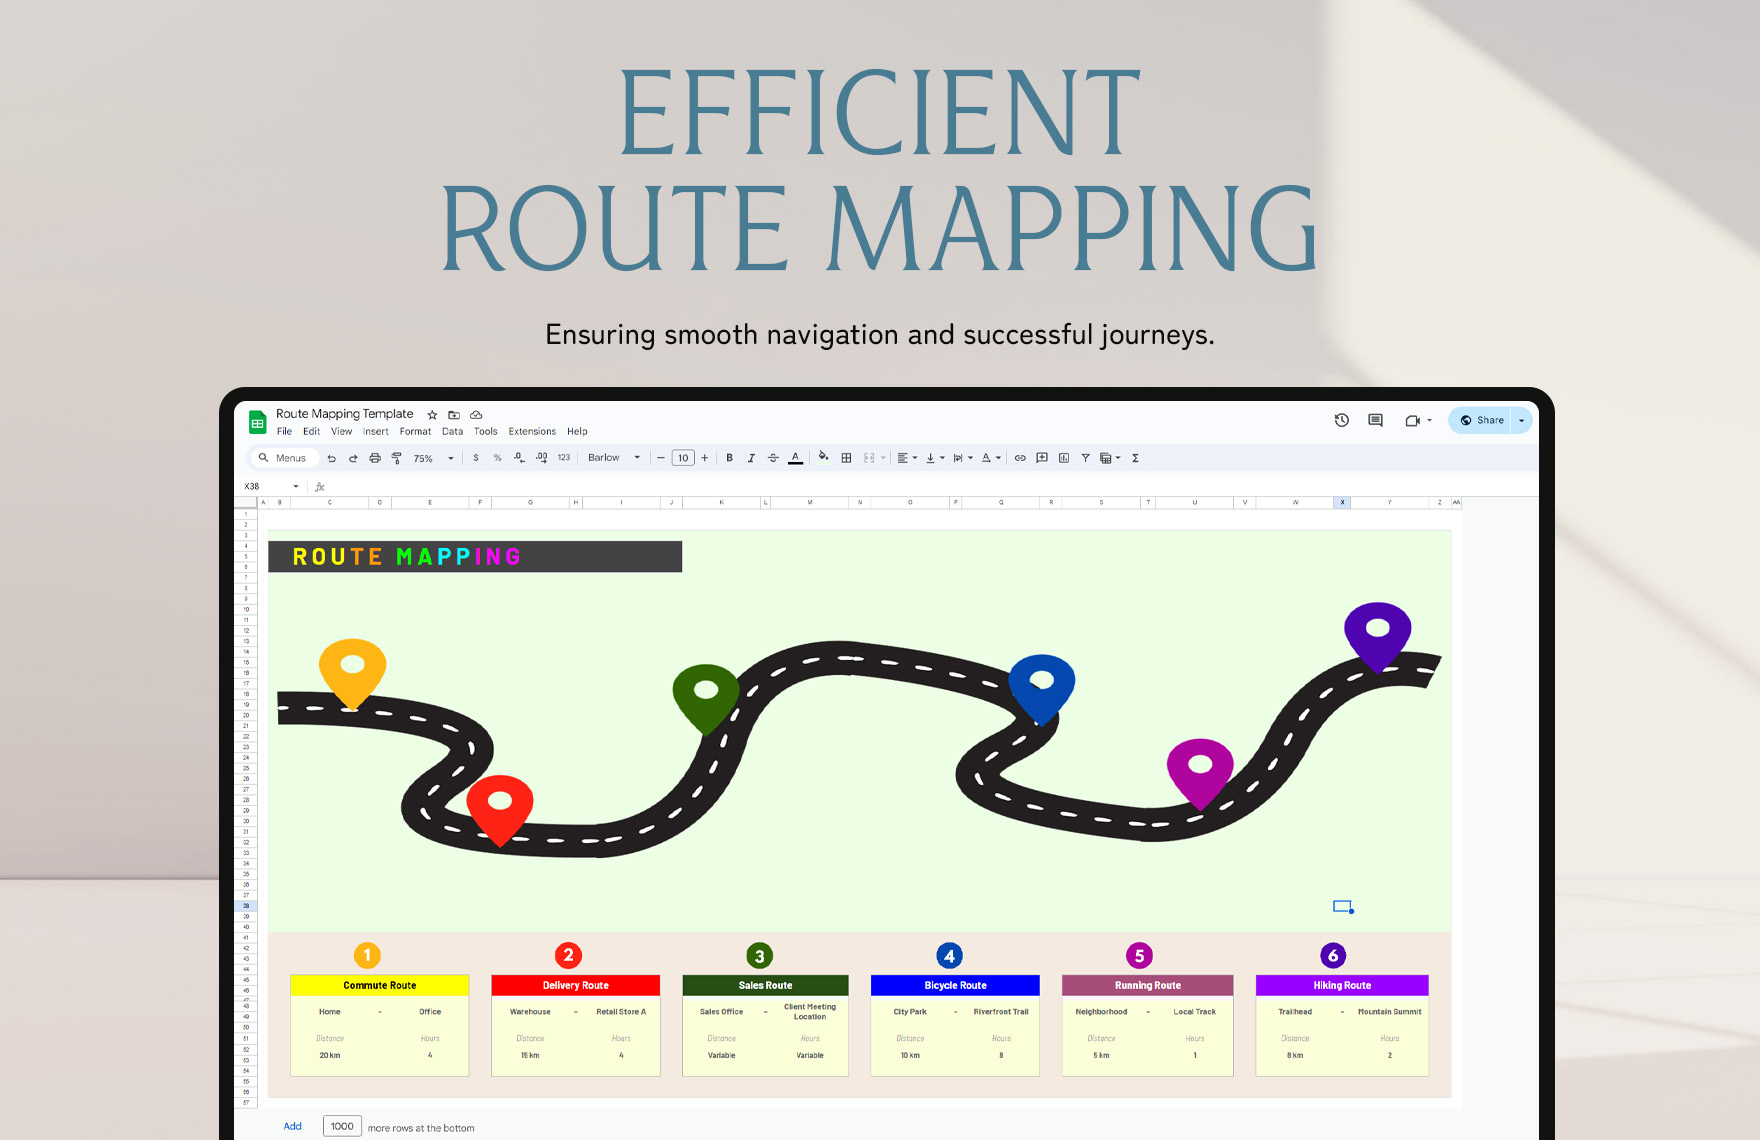 Route Mapping Template